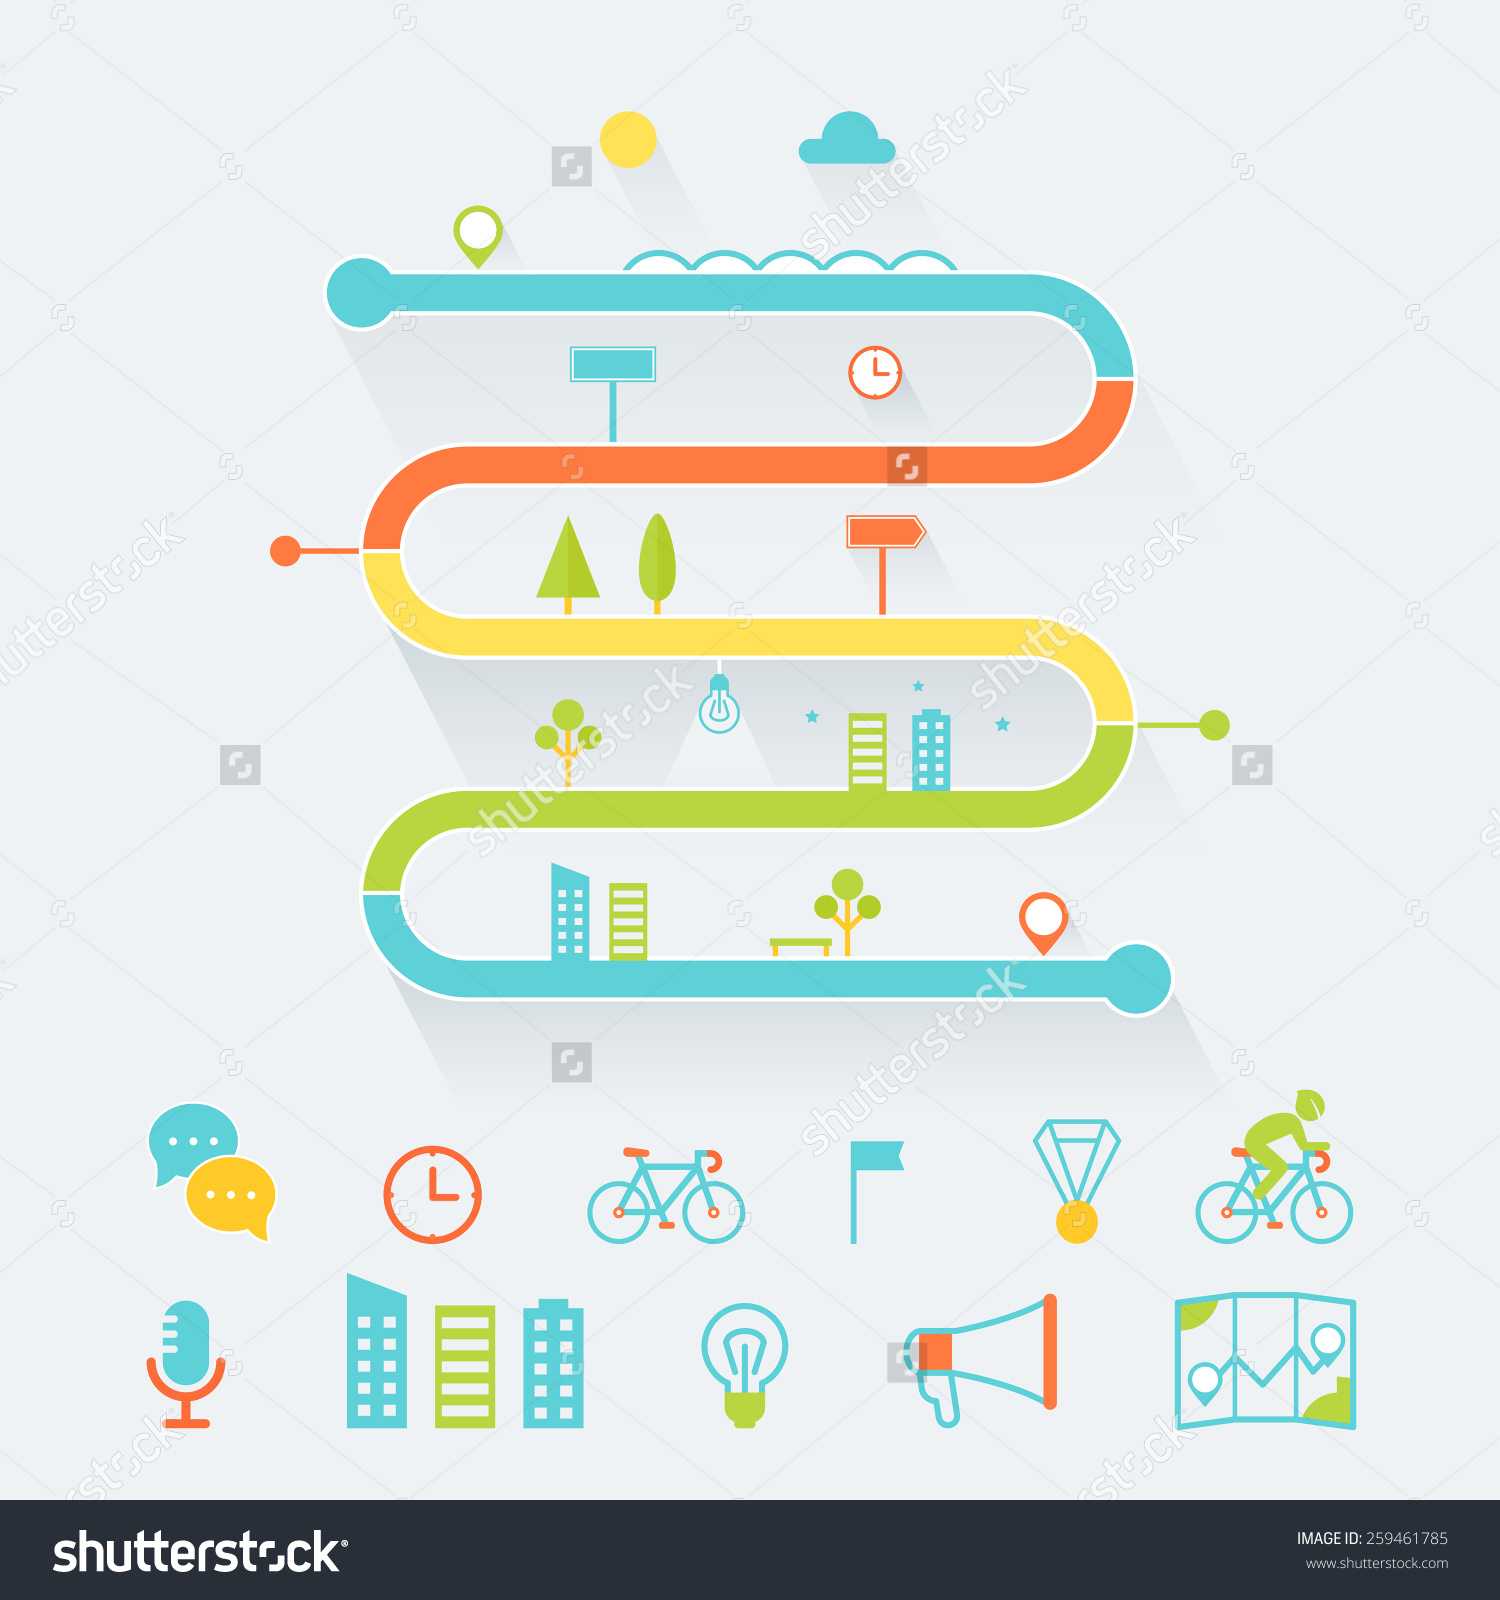 Library Of Timeline Road Map Svg Transparent Download Png In Blank Road Map Template